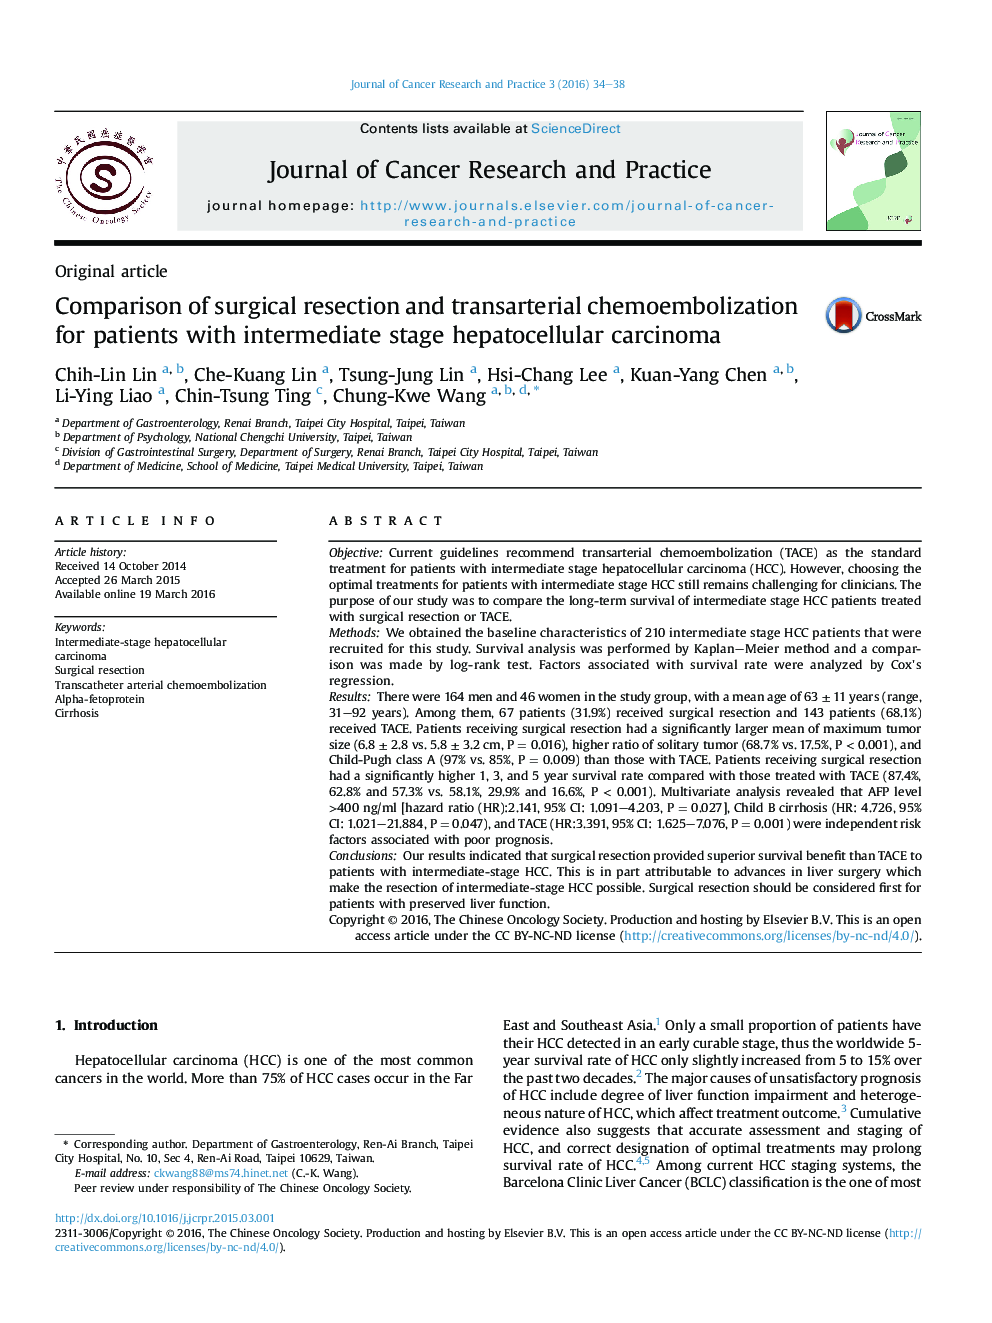 Comparison of surgical resection and transarterial chemoembolization for patients with intermediate stage hepatocellular carcinoma 